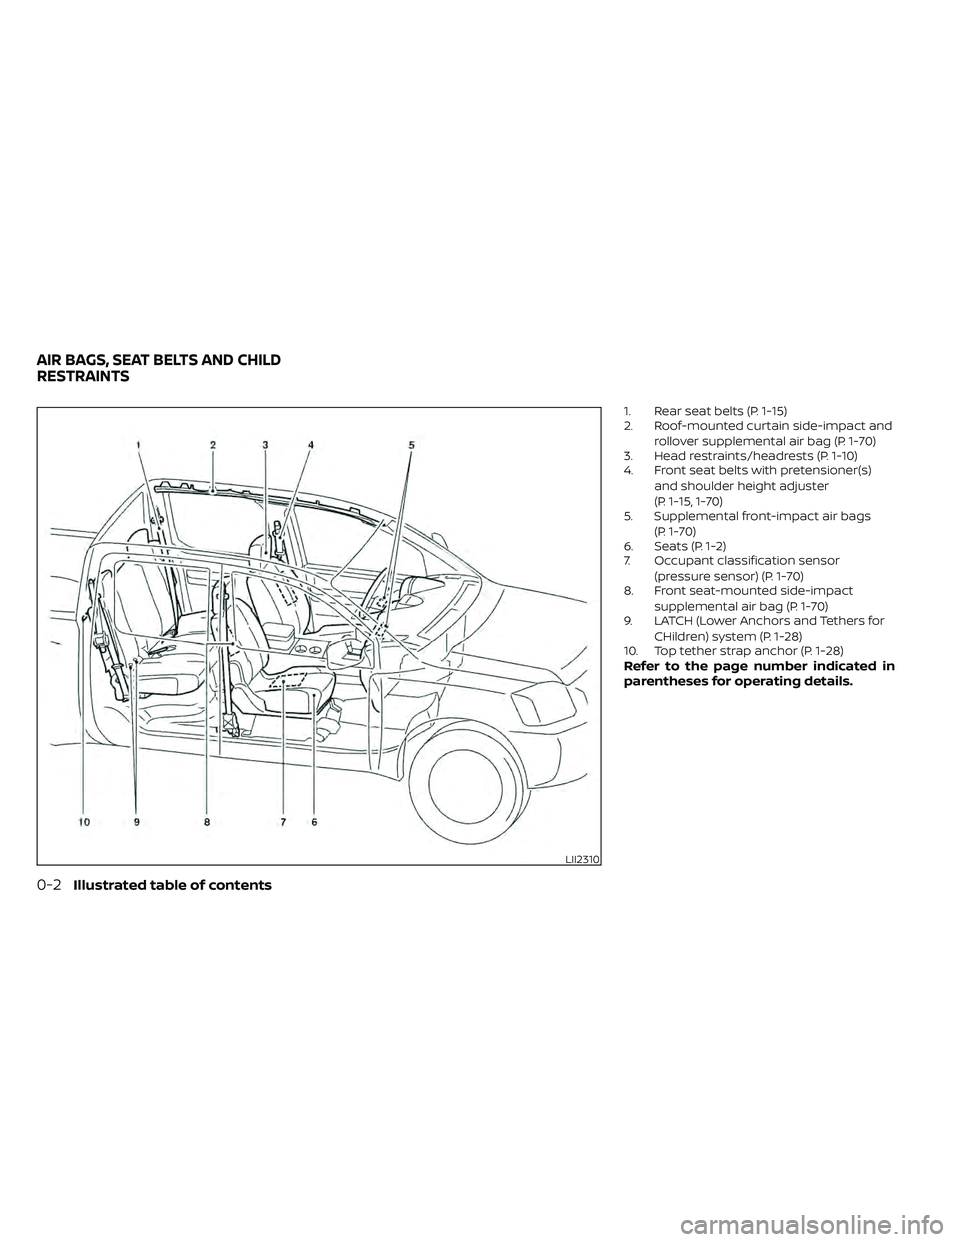 NISSAN FRONTIER 2020  Owner´s Manual 1. Rear seat belts (P. 1-15)
2. Roof-mounted curtain side-impact androllover supplemental air bag (P. 1-70)
3. Head restraints/headrests (P. 1-10)
4. Front seat belts with pretensioner(s)
and shoulder